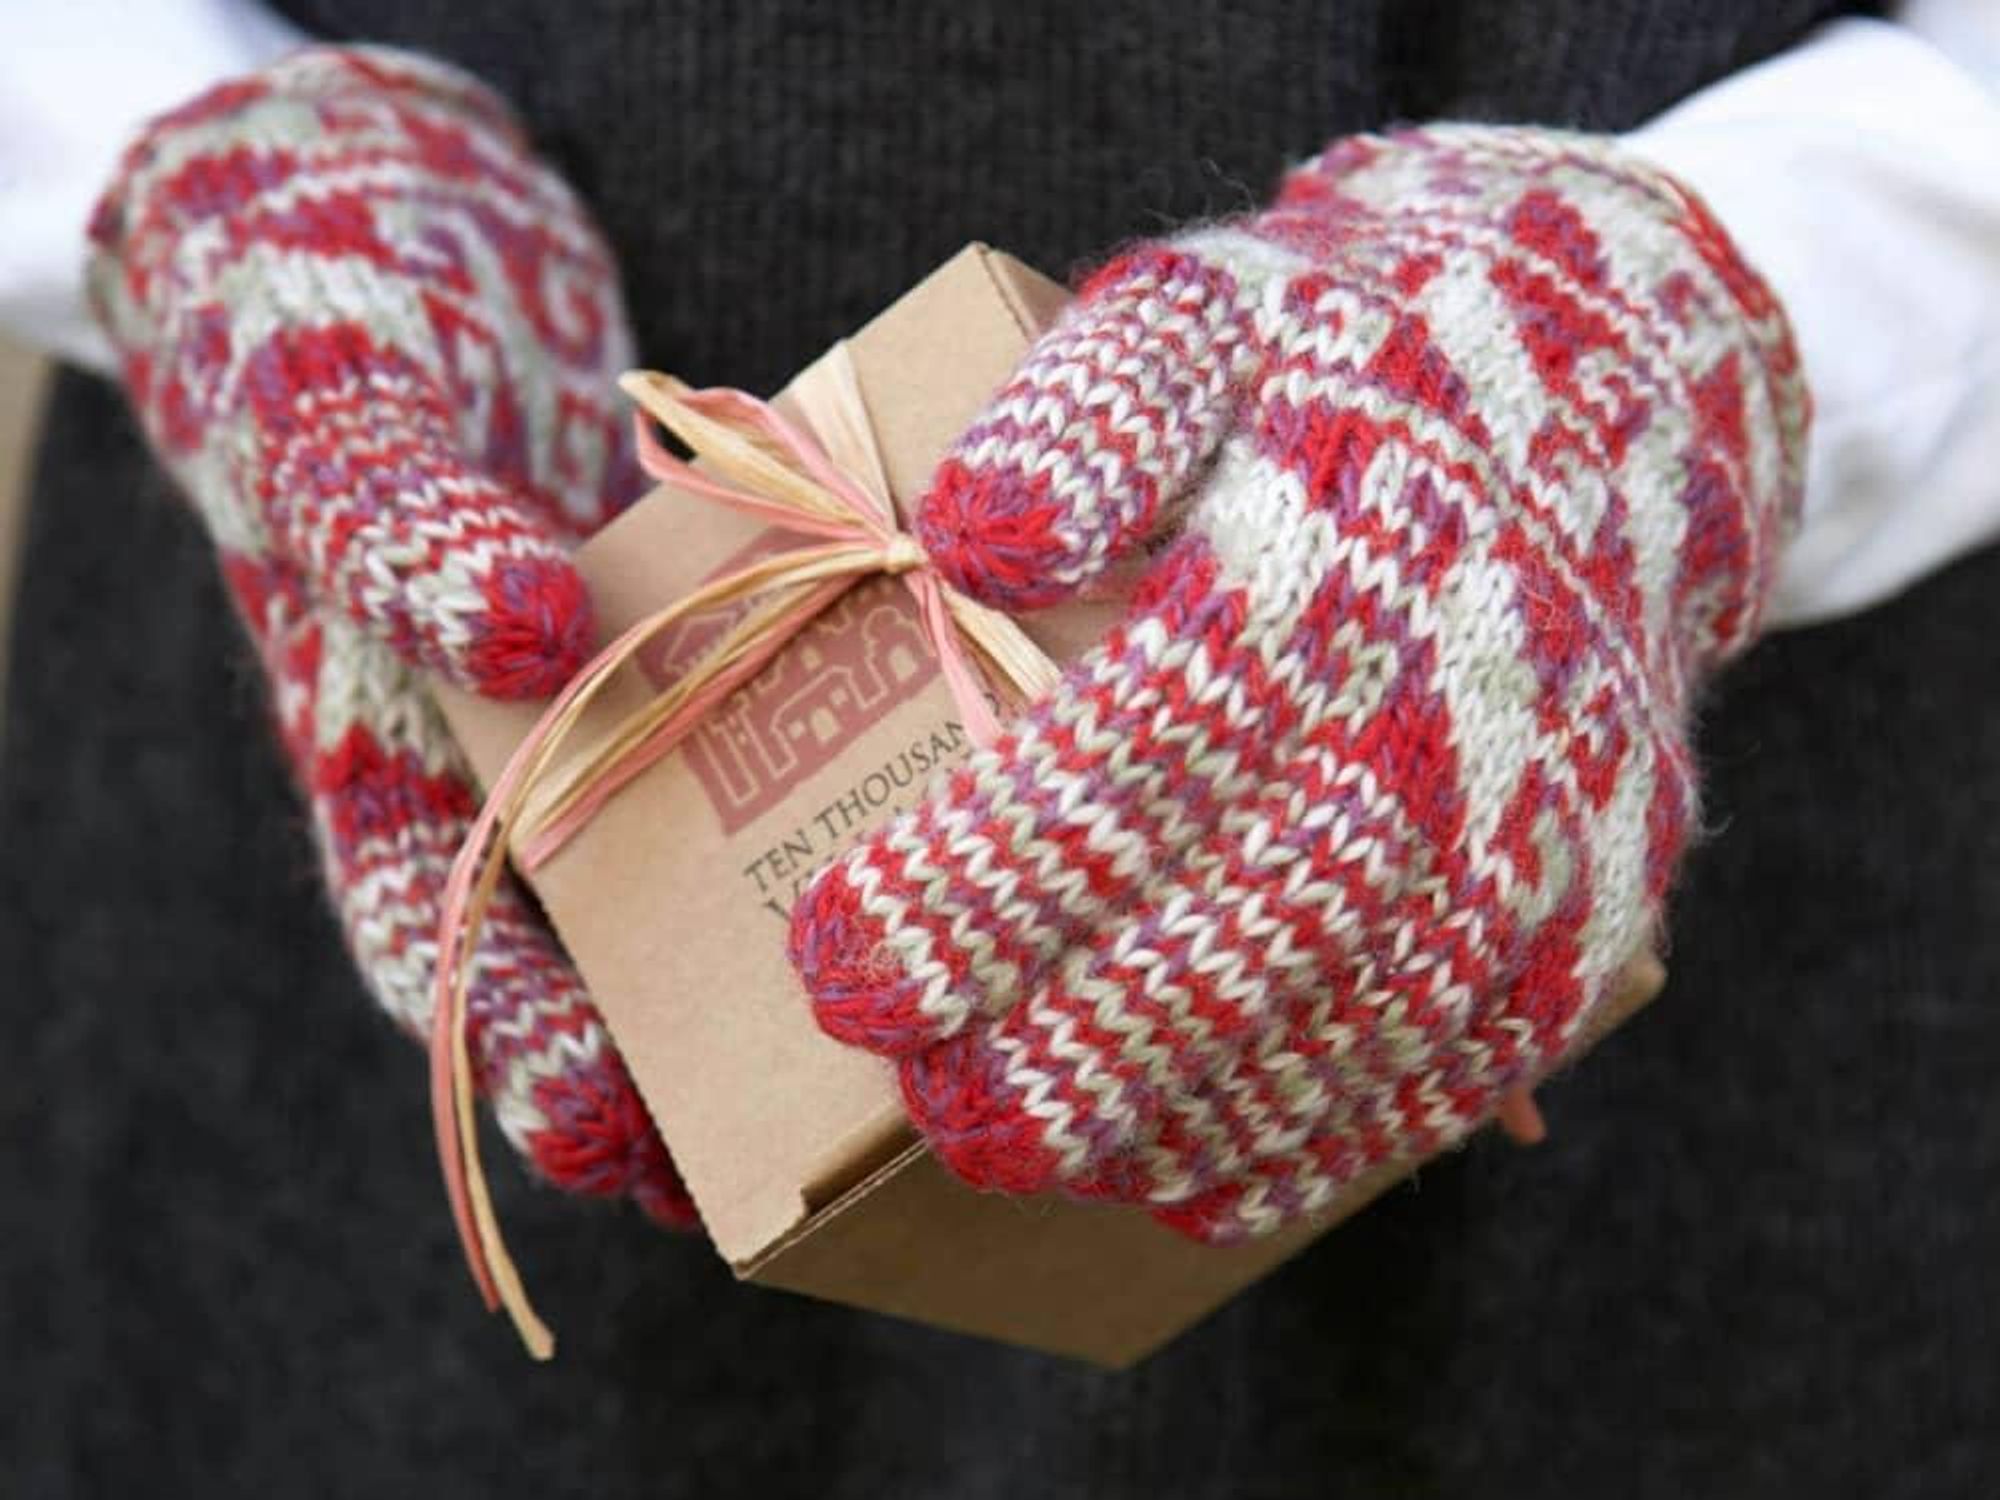 Ten Thousand Villages holidays Christmas gift gloves